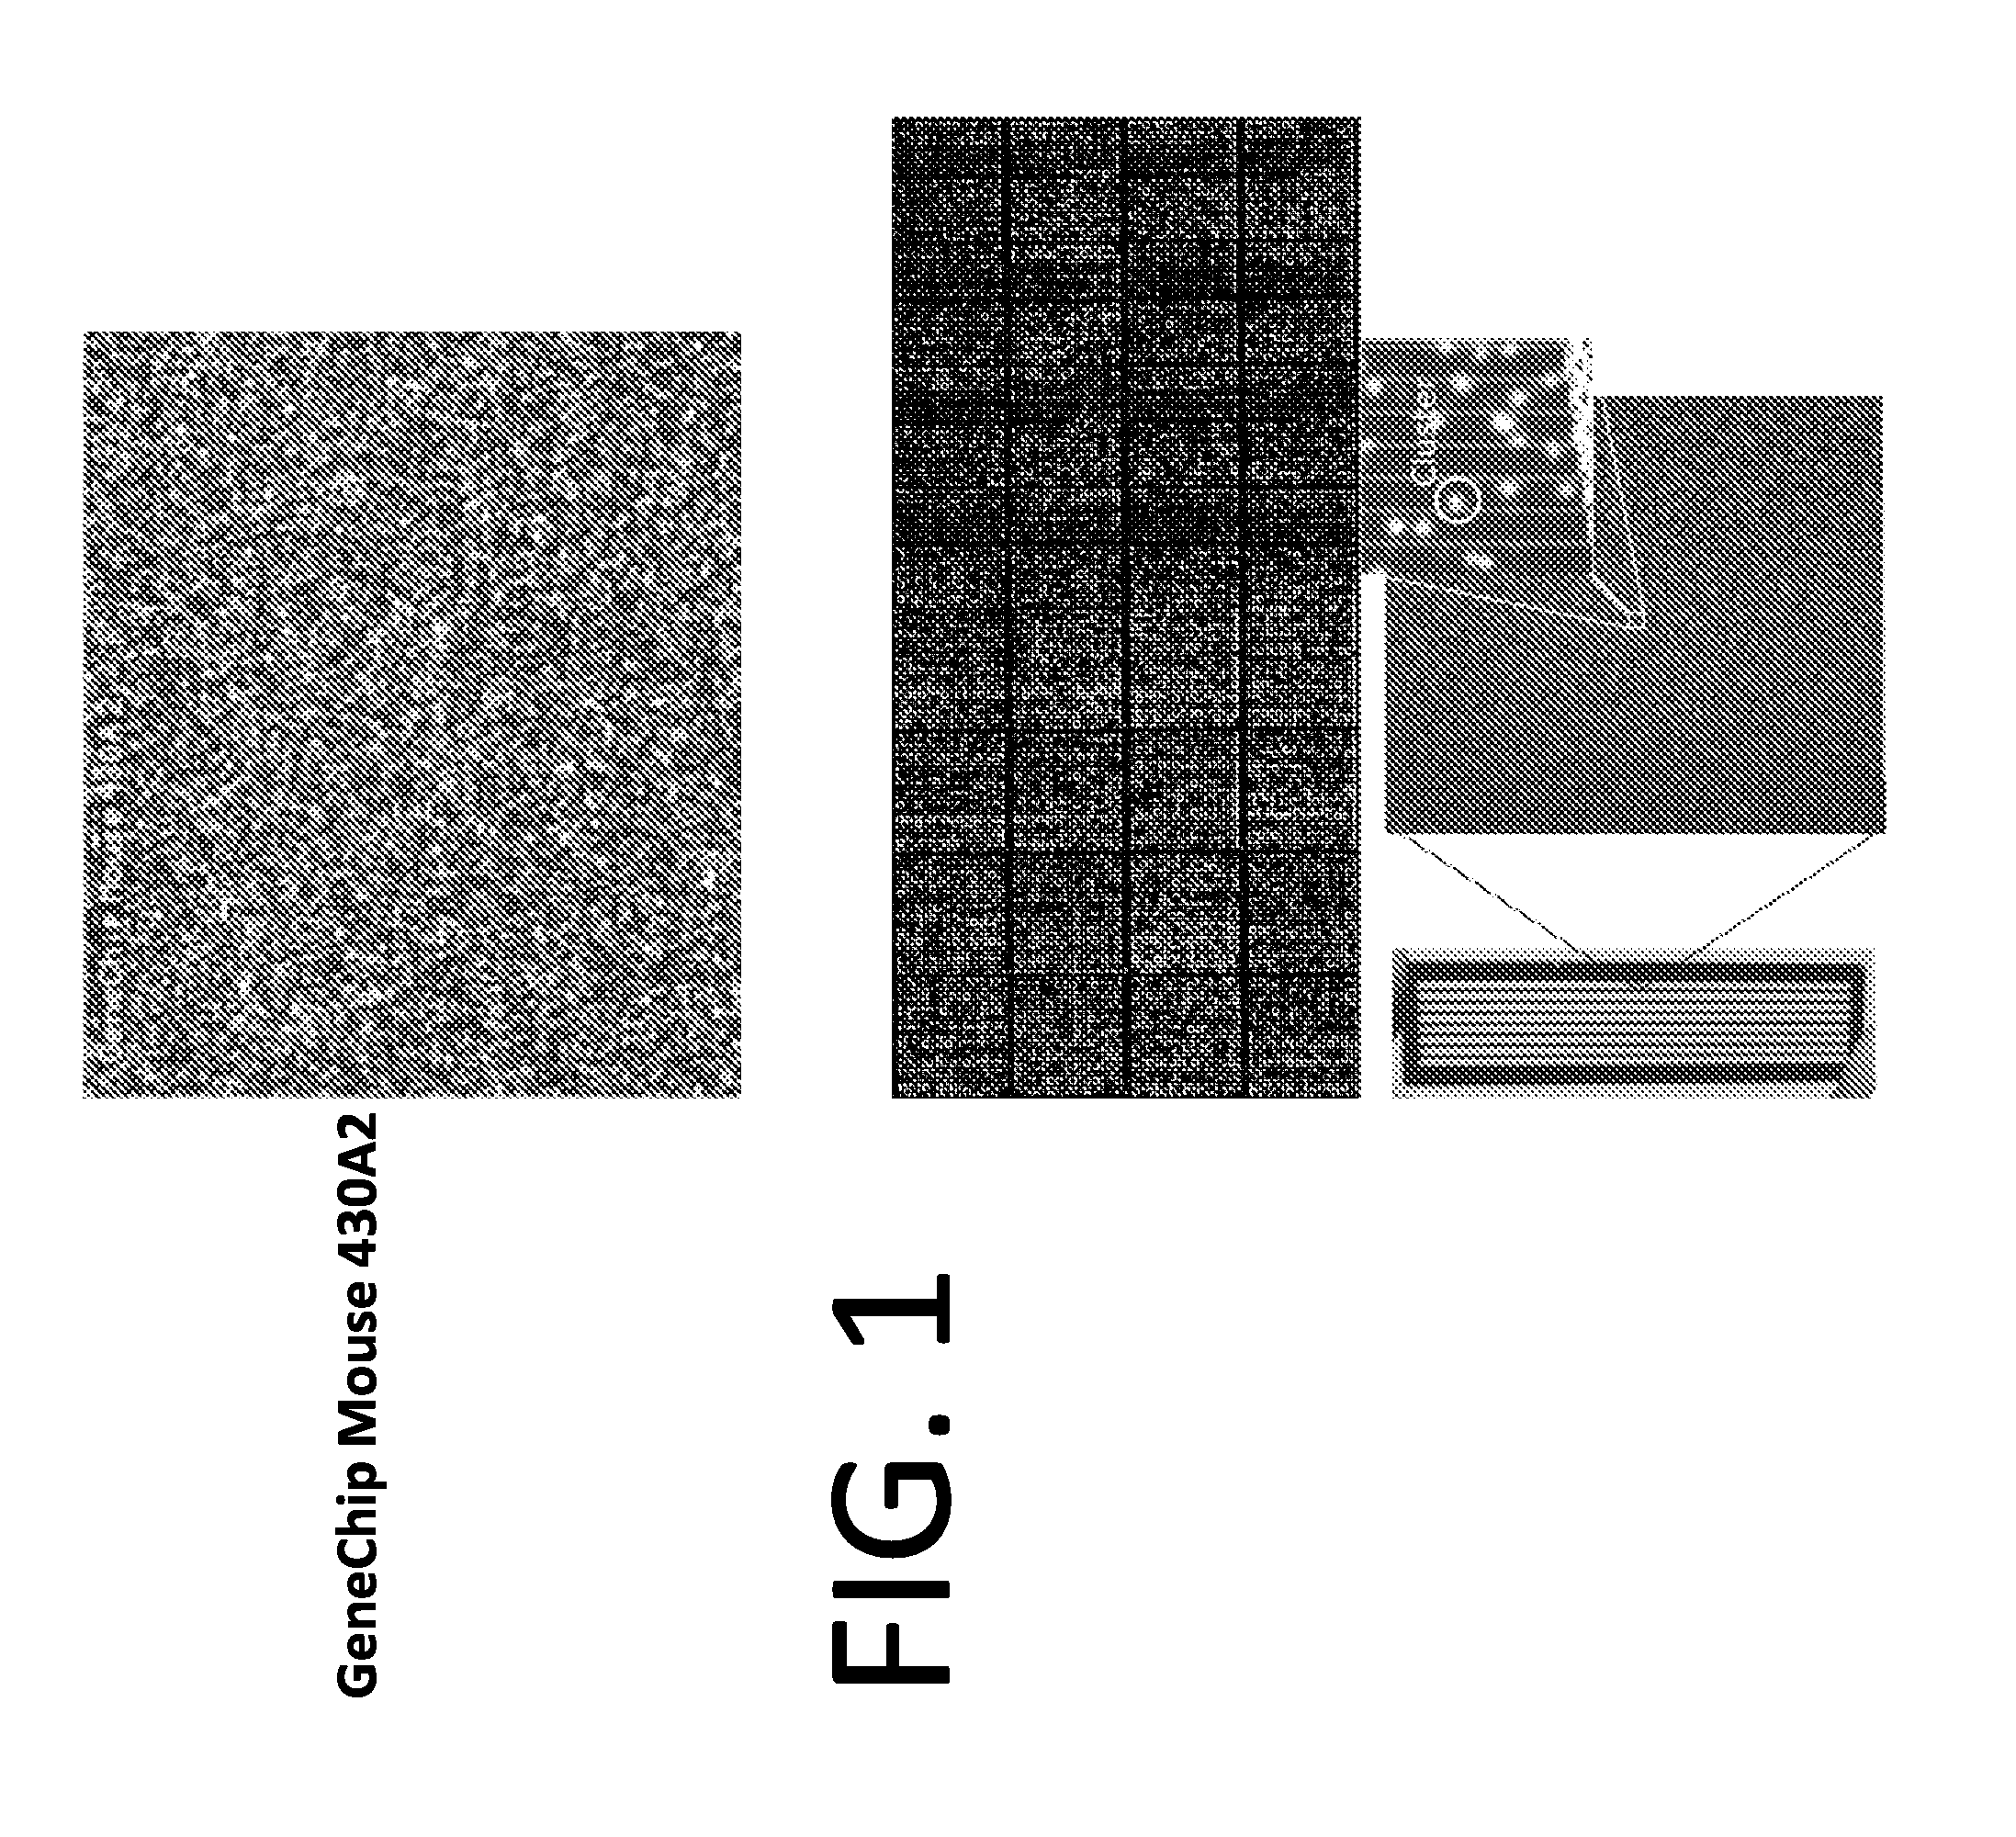 Fabrication of patterned arrays